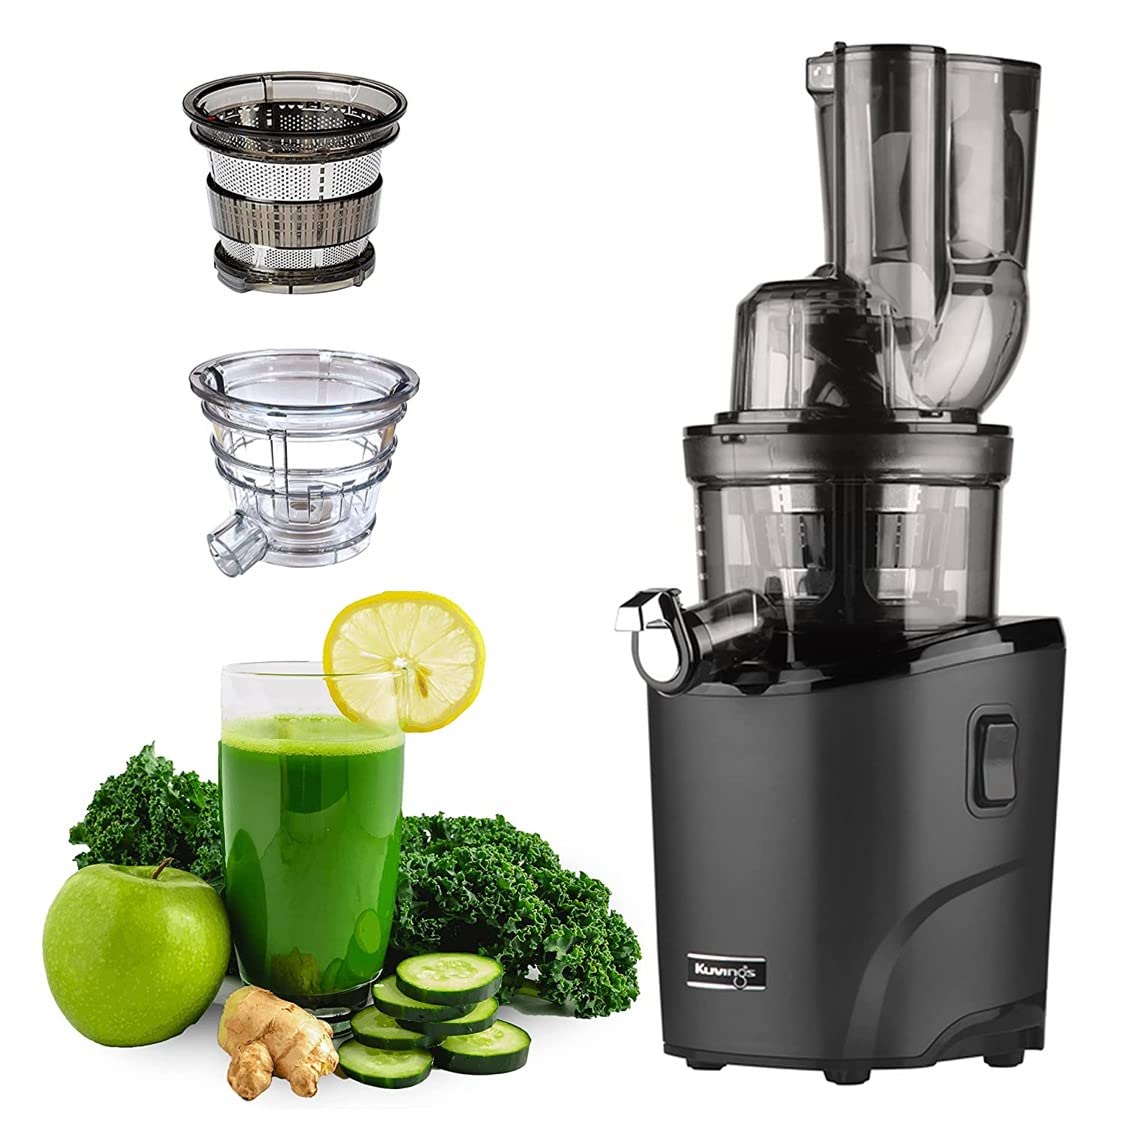 Kuvings REVO Series Professional Cold Press Whole Slow Juicer, World's First Juicer with Patented Automatic-Cutting Auger to reduce juicing time (REVO830 Matt Black + Smoothie & Sorbet)